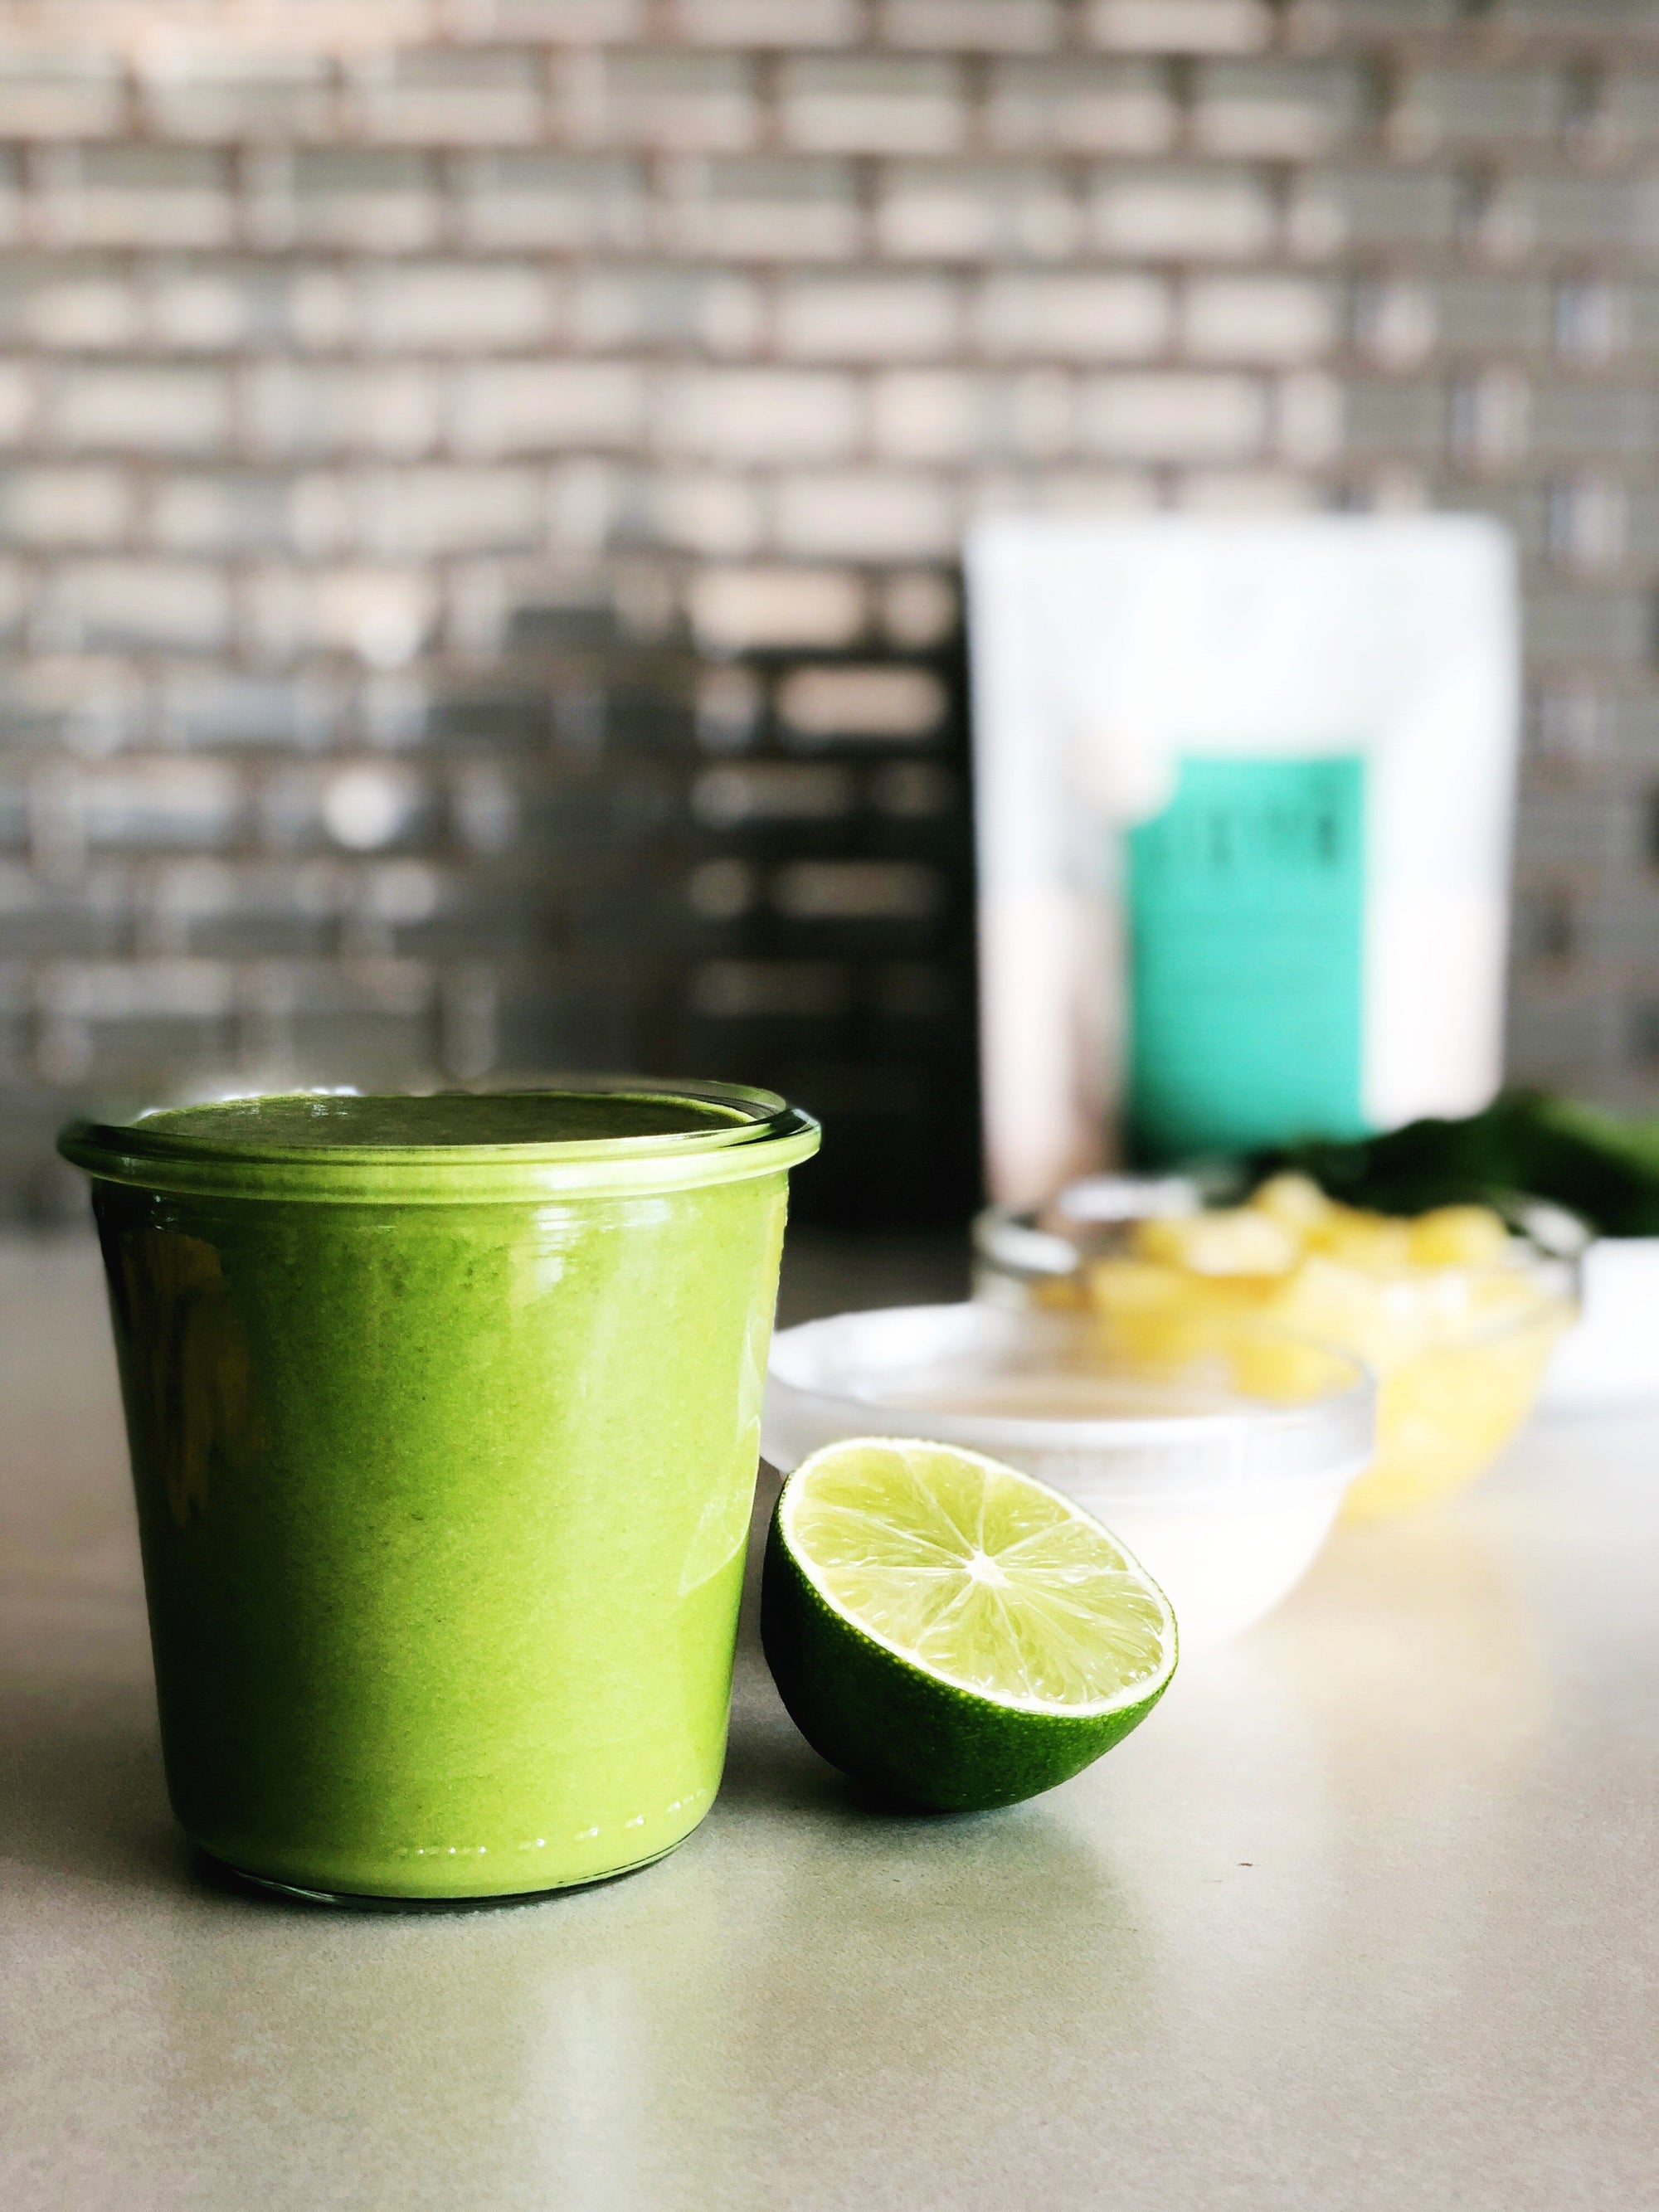 6 Green Smoothie Recipes Featuring the Matcha Focus Superblend